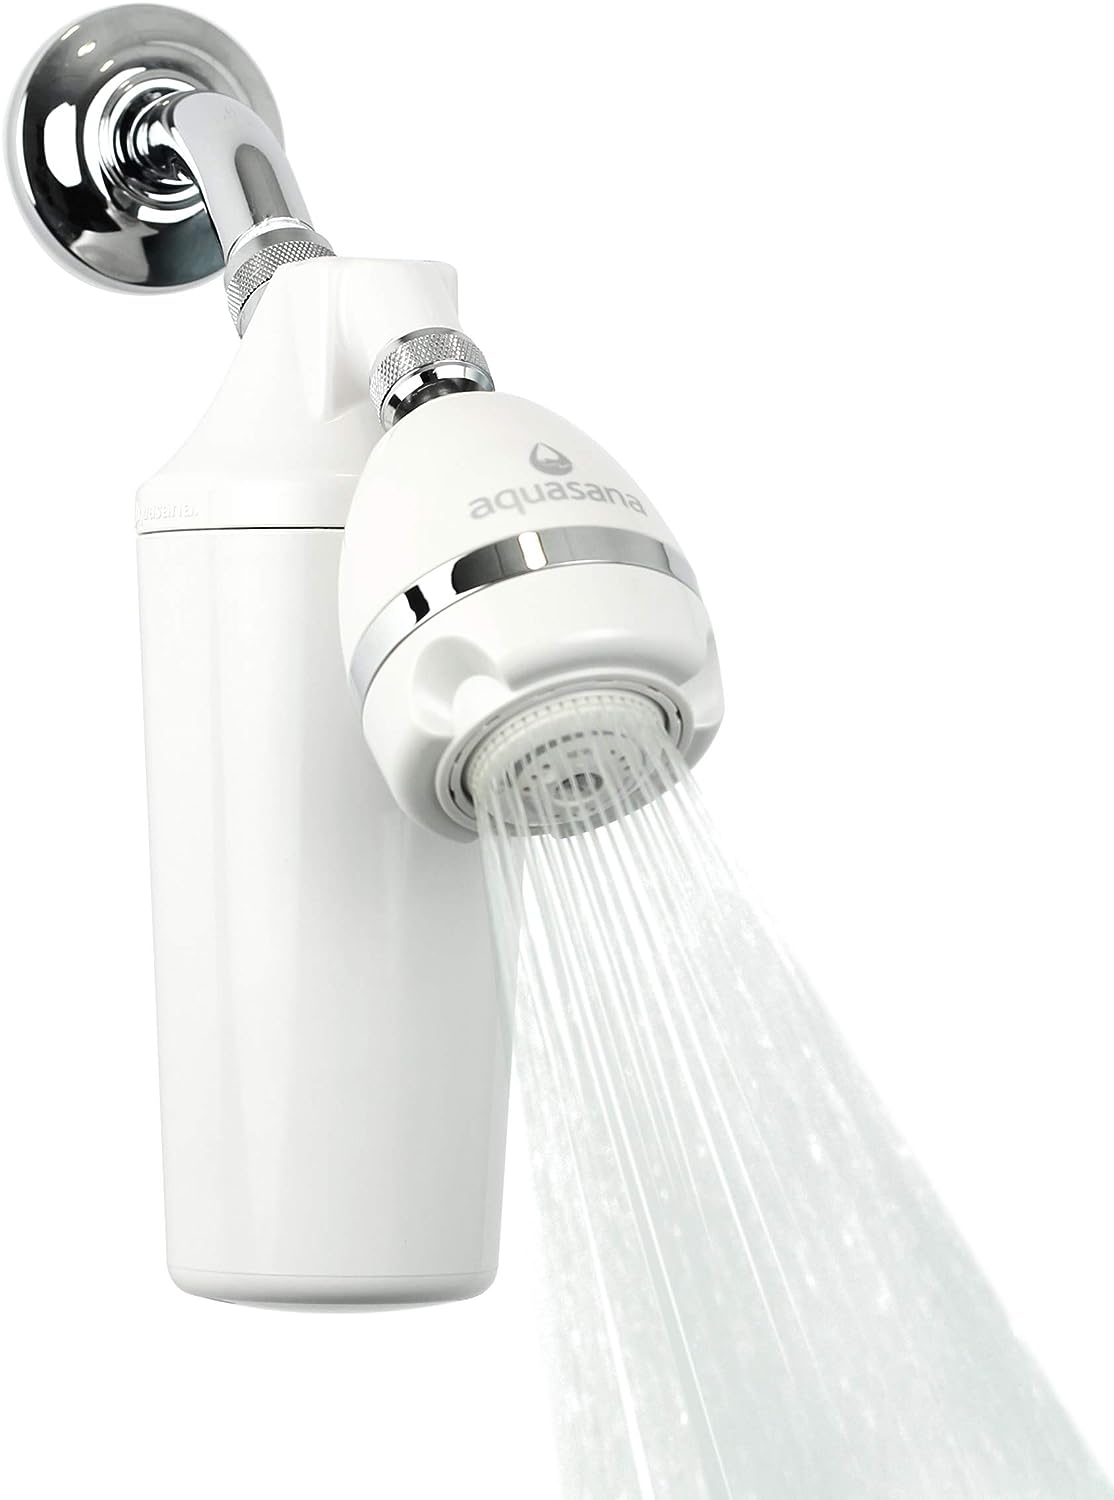 Aquasana Shower Water Filter System Max Flow Rate w/ [...]